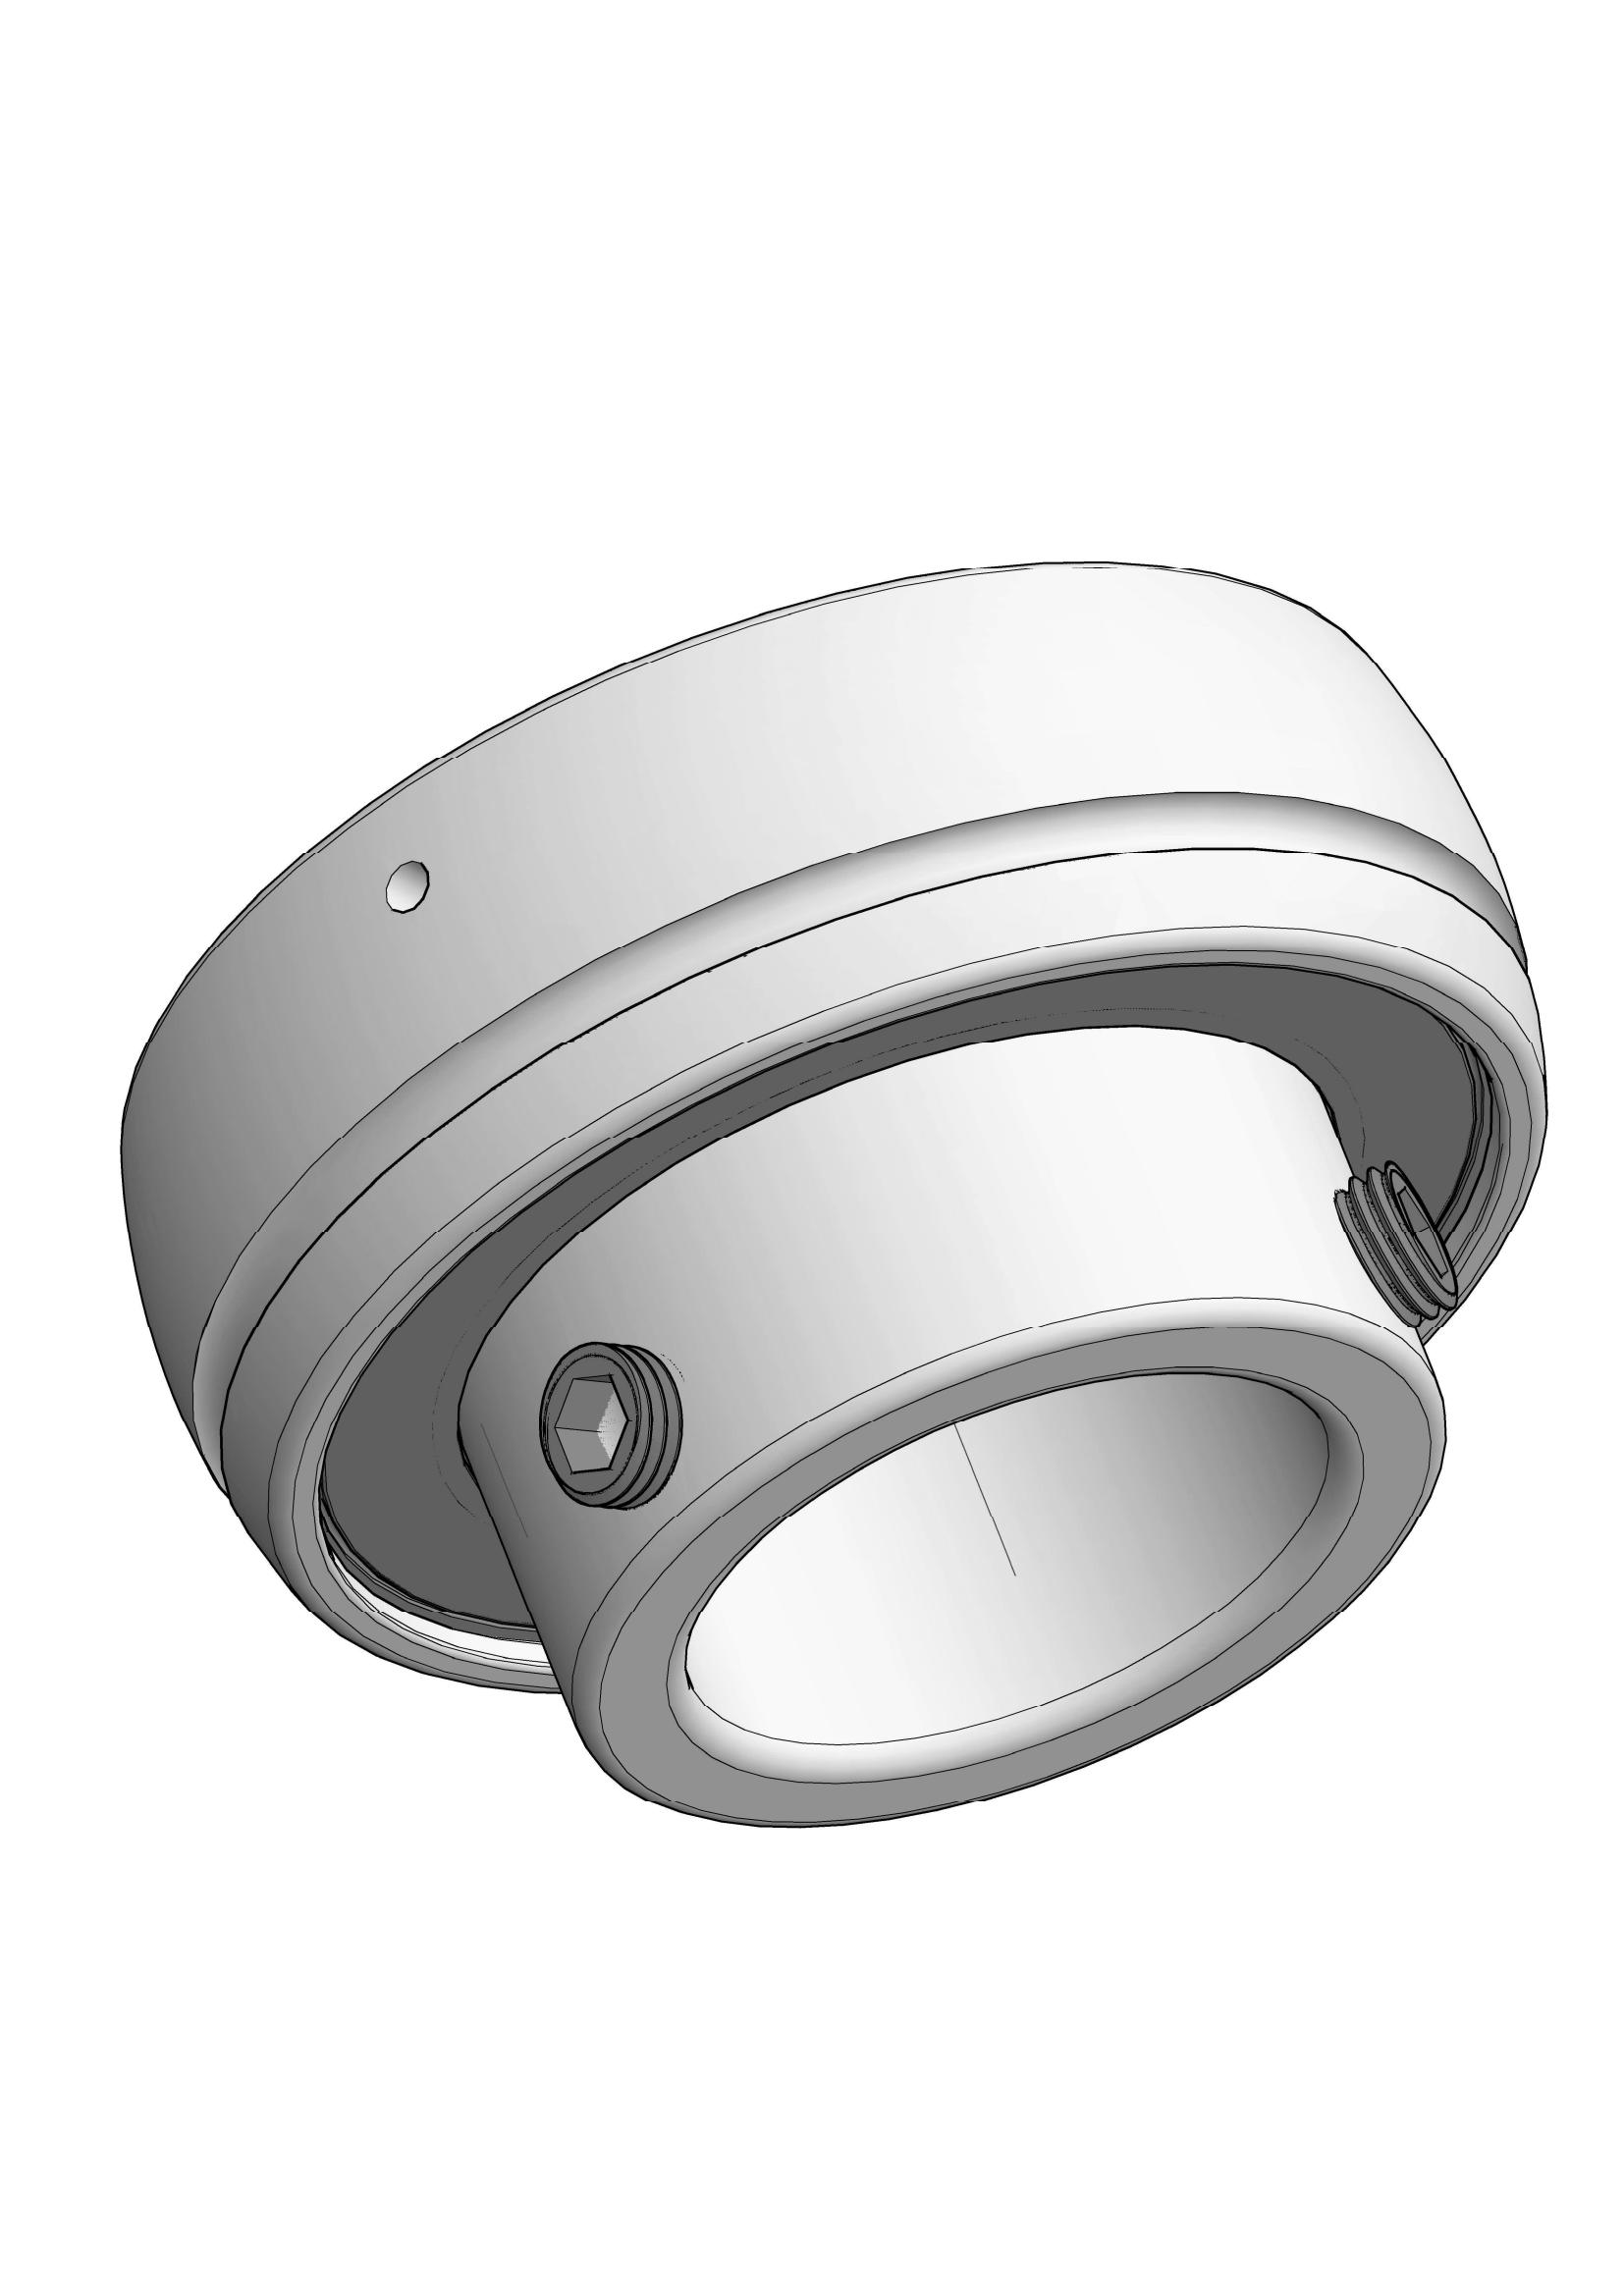 SB202-10 insert ball bearings with Eccentric Collar Lock with 5/8 inch Bore